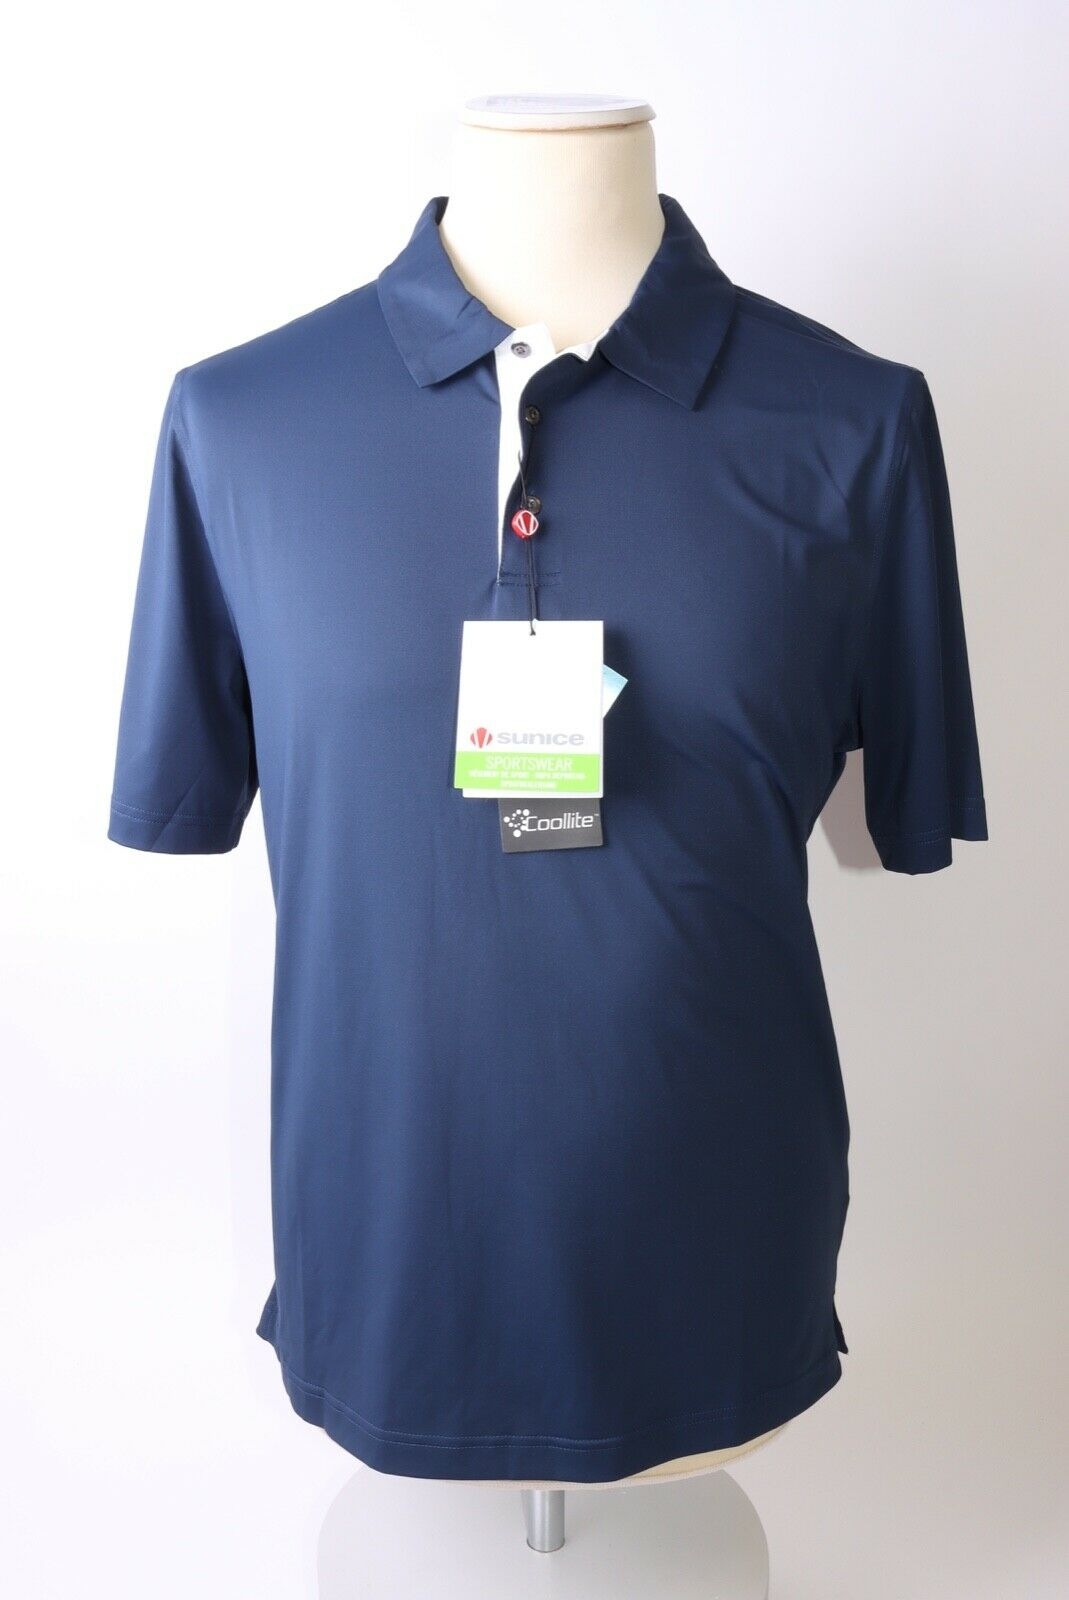 Sunice Men’s Max Coolite Polo Shirt – M – Navy – Get That Brand